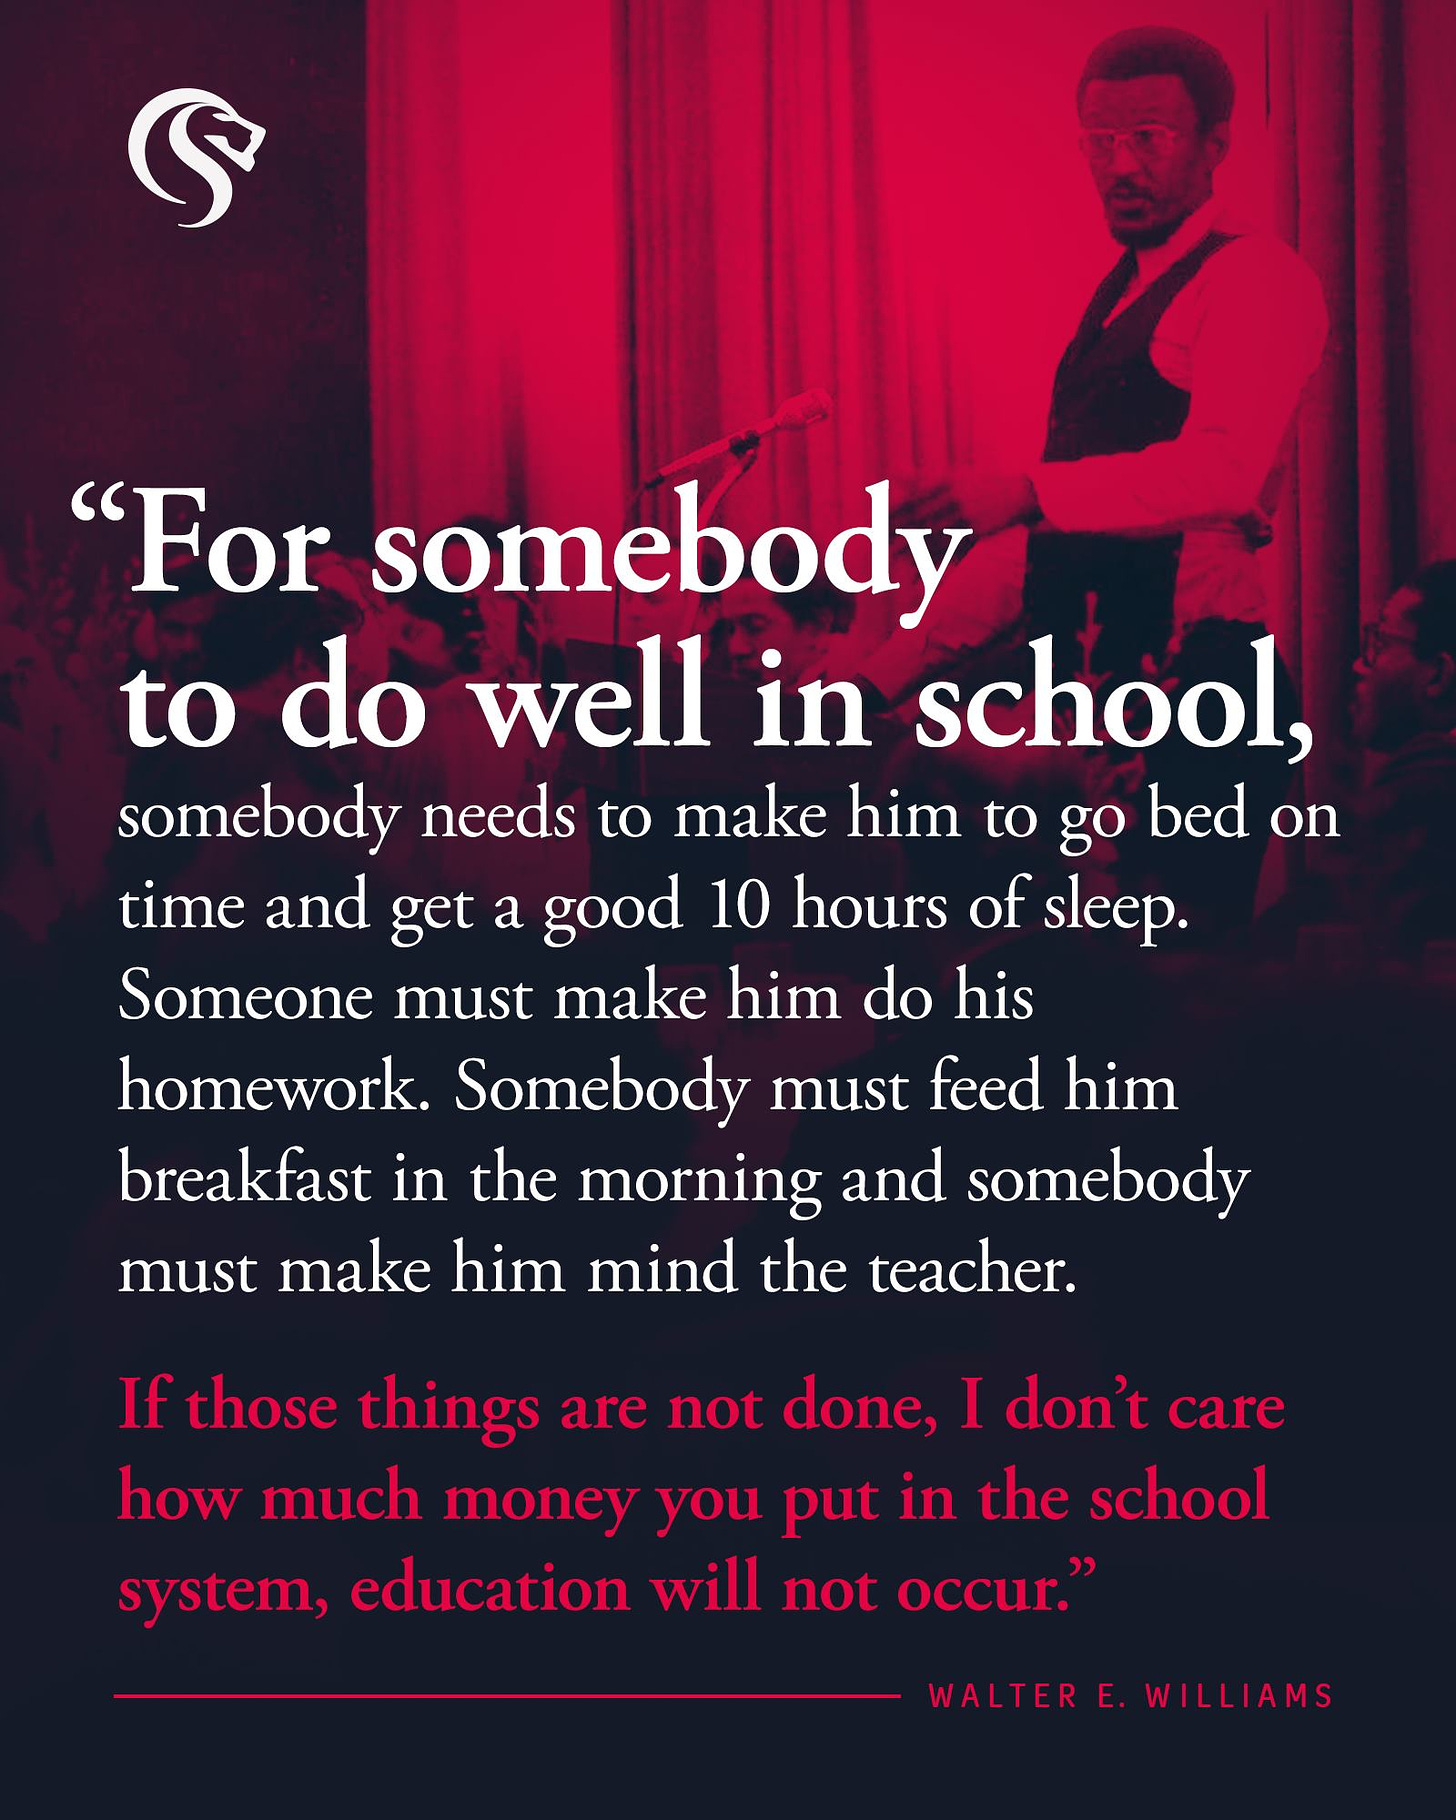 May be an image of 1 person and text that says '"For somebody to do well in school, somebody needs to make him to go bed on time and get a good 10 hours of sleep. Someone must make him do his homework. Somebody must feed him breakfast in the morning and somebody must make him mind the teacher. If those things are not done, I don't care how much money you put in the school system, education will not occur." WALTERE WILLIAMS'